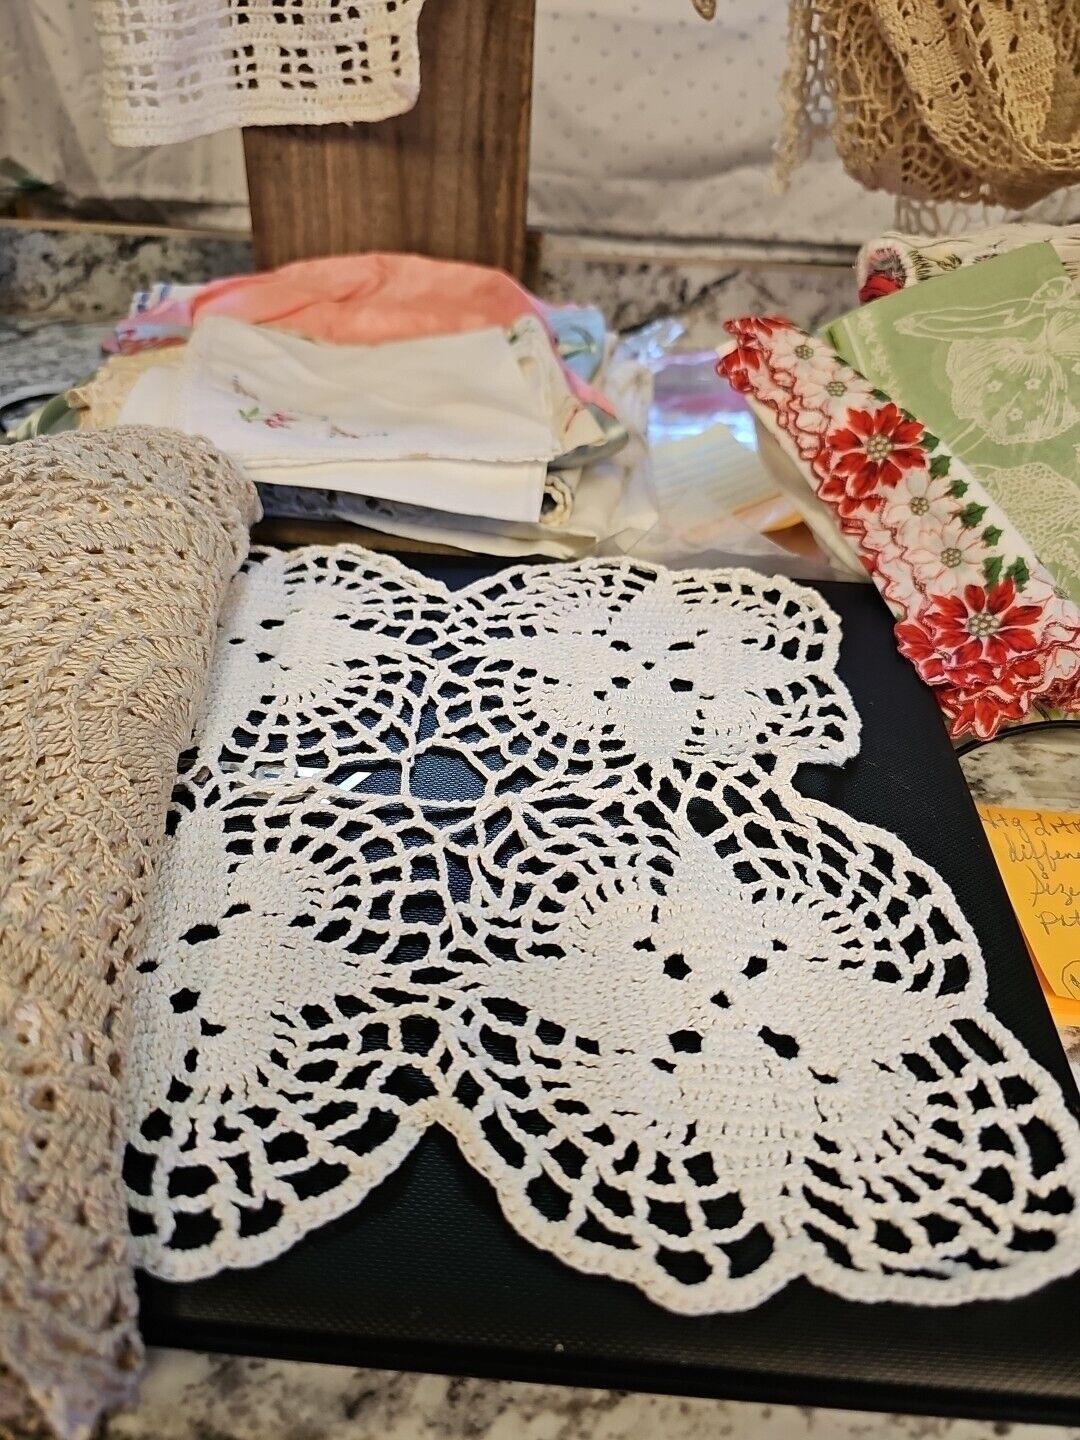 VTG Lot Of 10 DOILIES Different Sizes / Shapes / Colors/ And Patterns